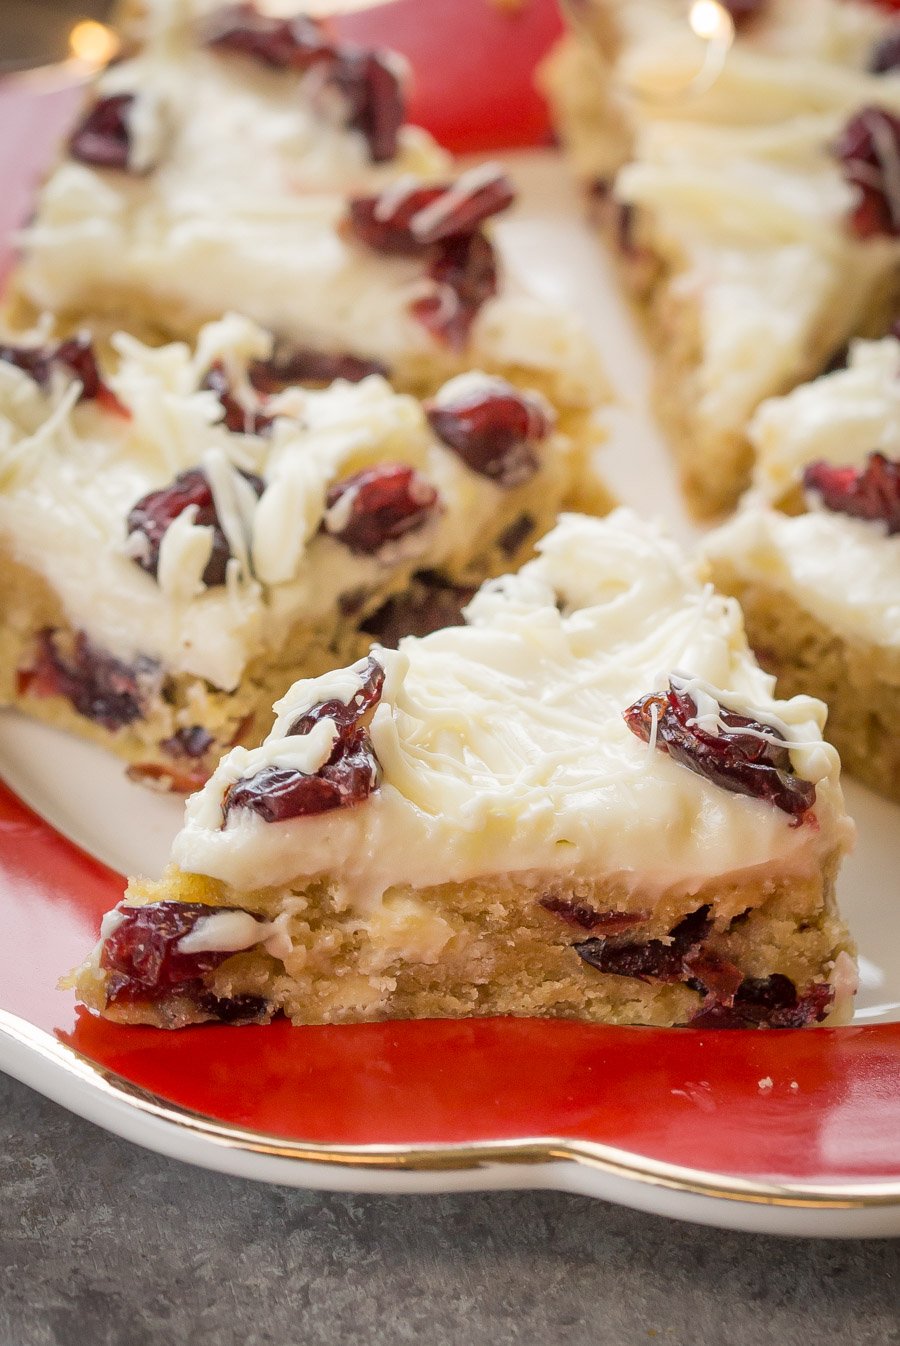 Cranberry Bliss Bars topped with dried cranberries on a plate.